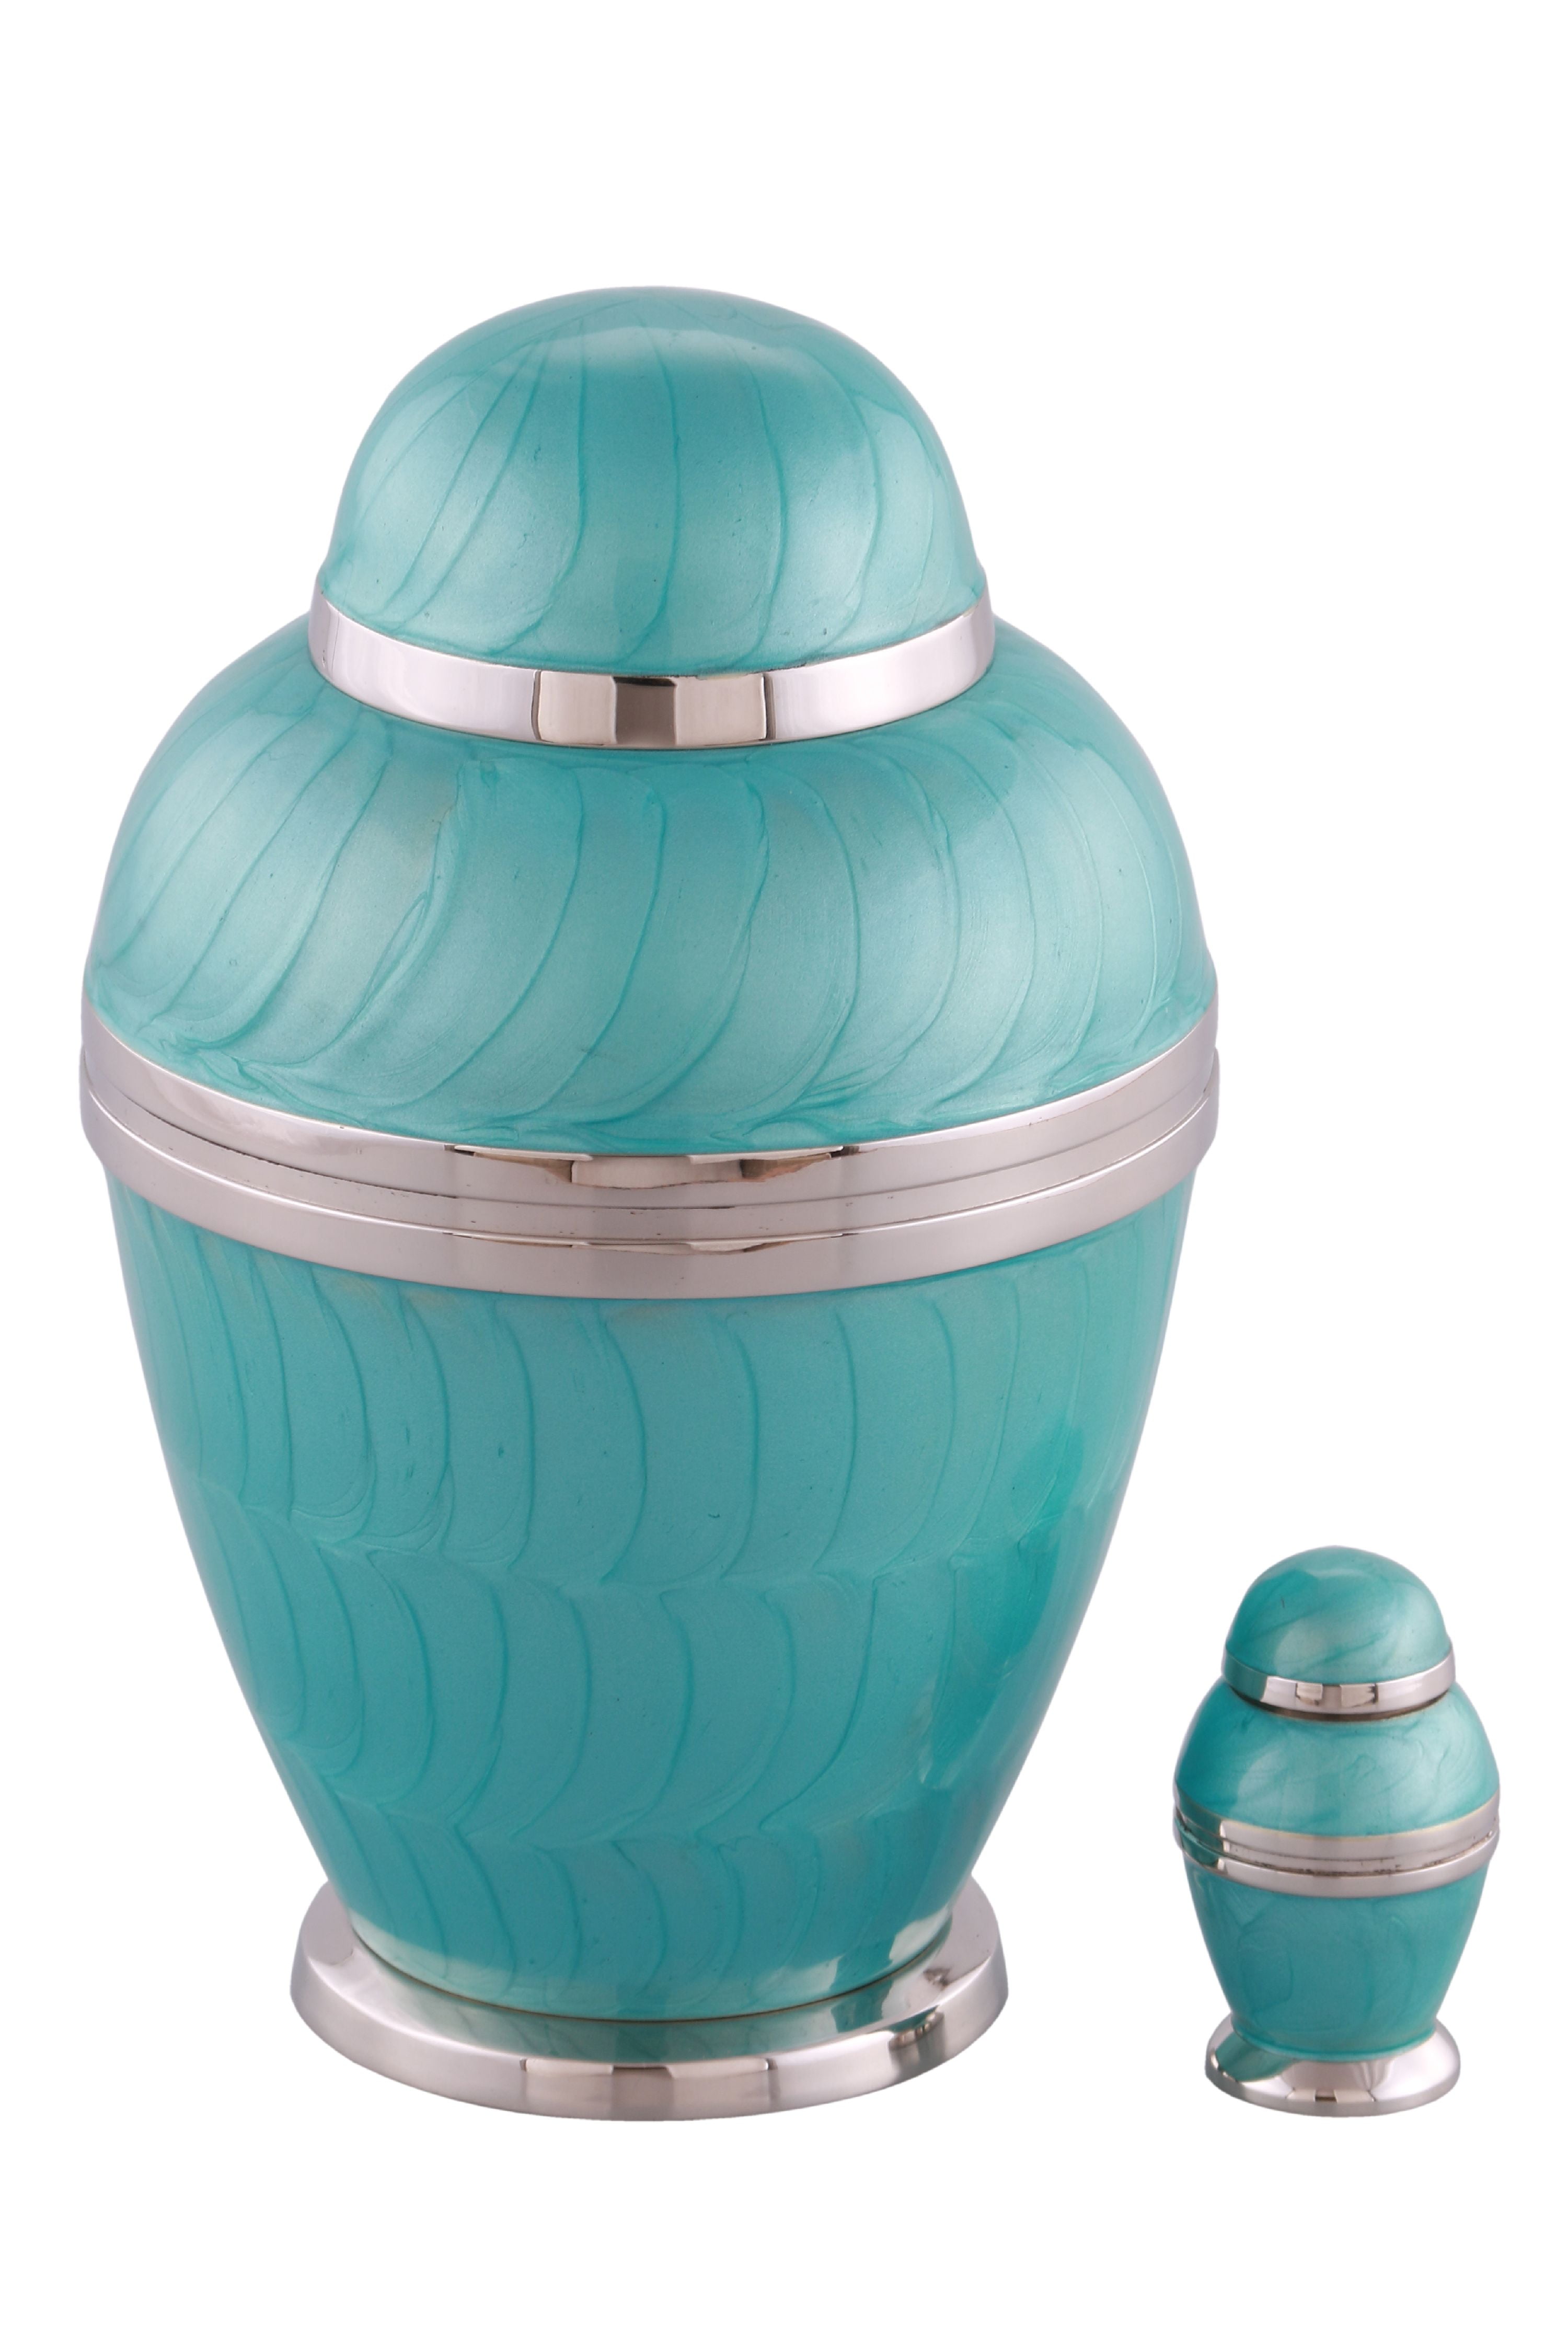 Large Metal Funeral Urn for Adult up to 220 Teal Cremation Urn for Human Ashes 